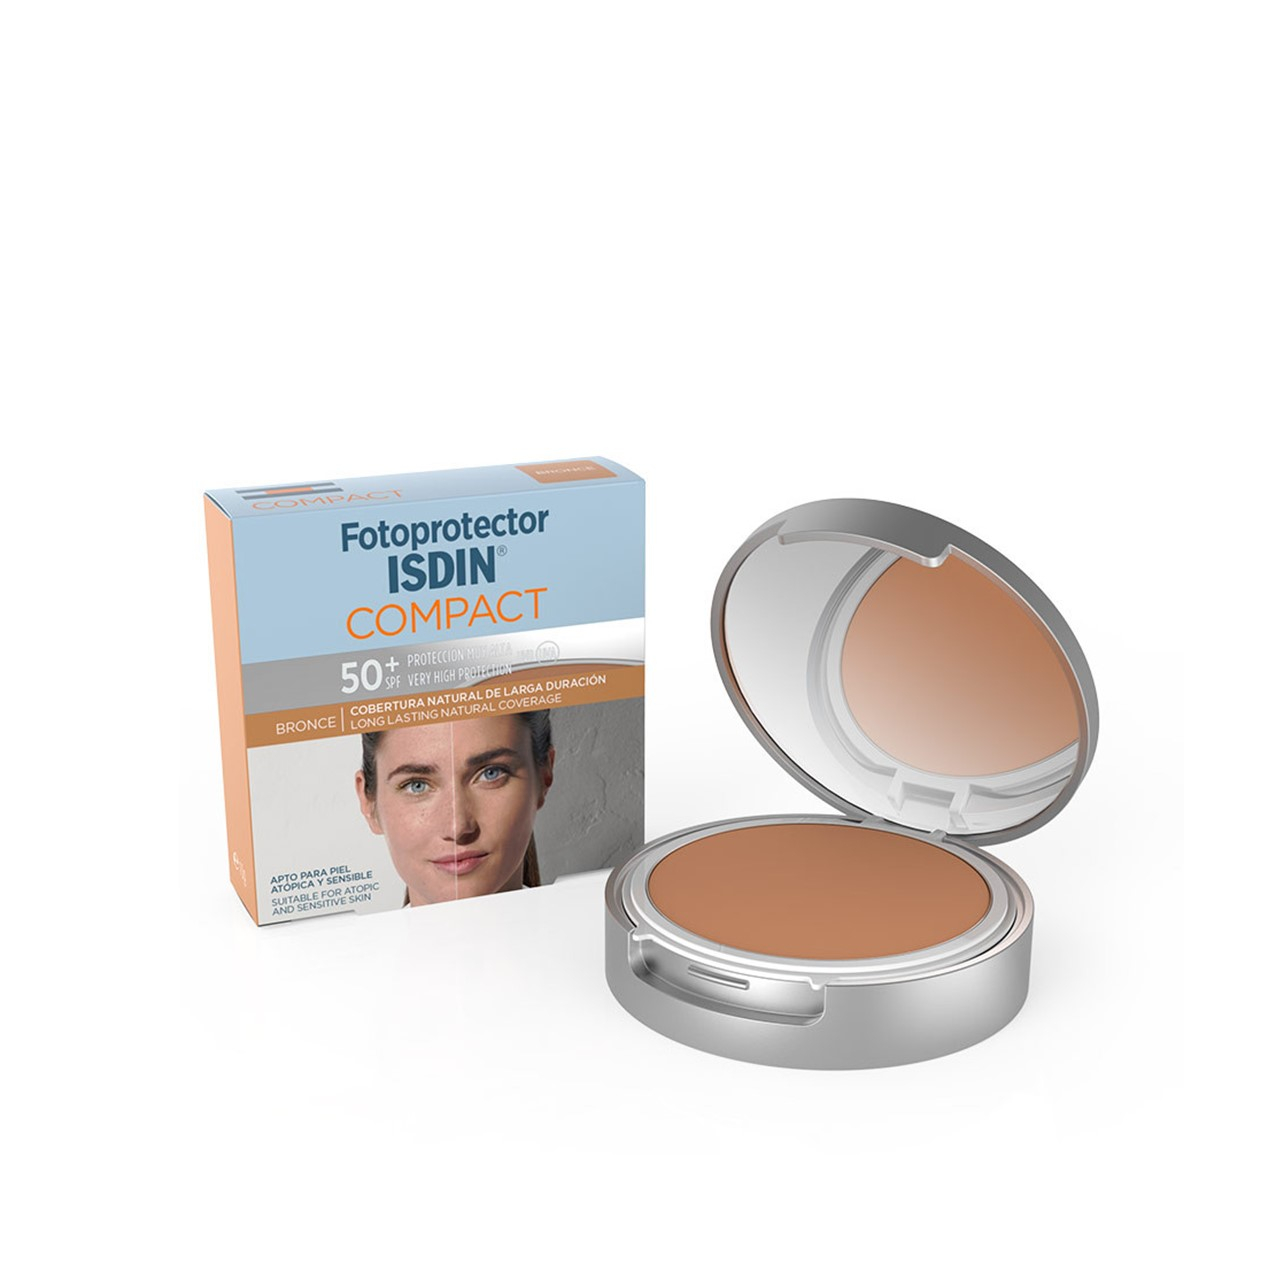 ISDIN Fotoprotector Compact SPF50+ Color Bronze 10g